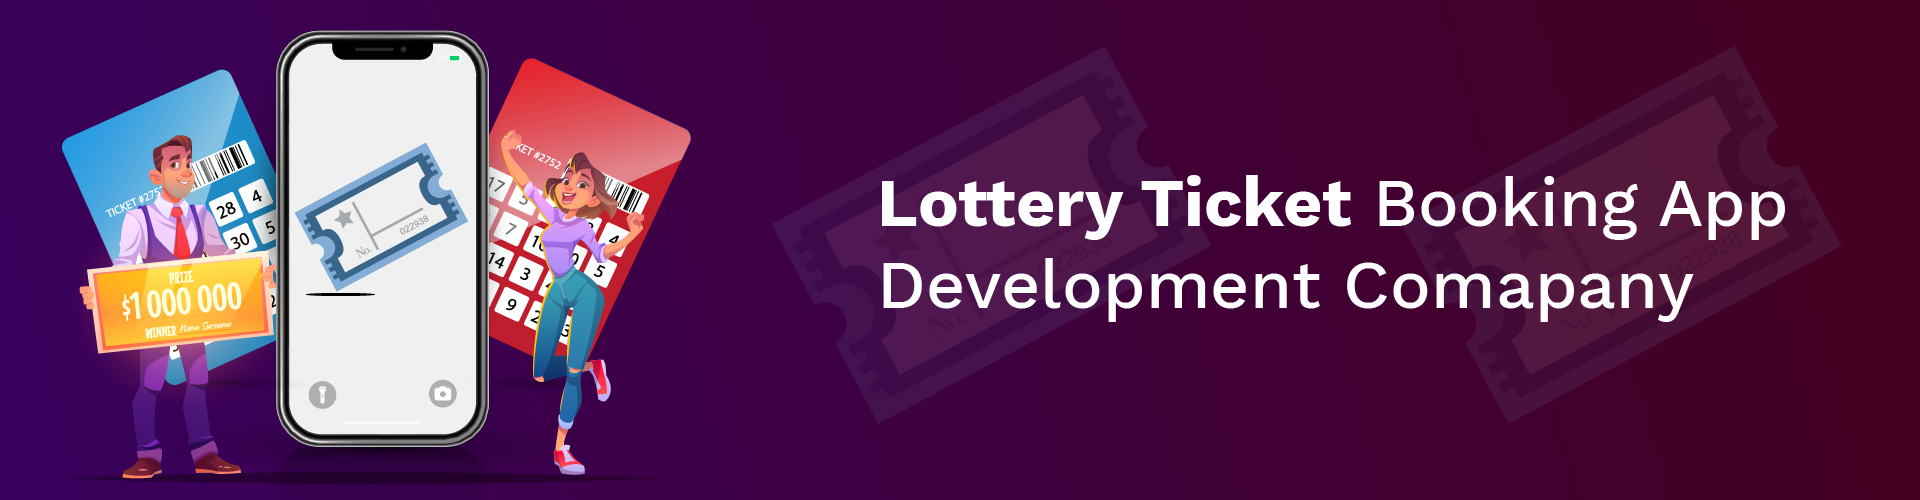 lottery ticket booking app